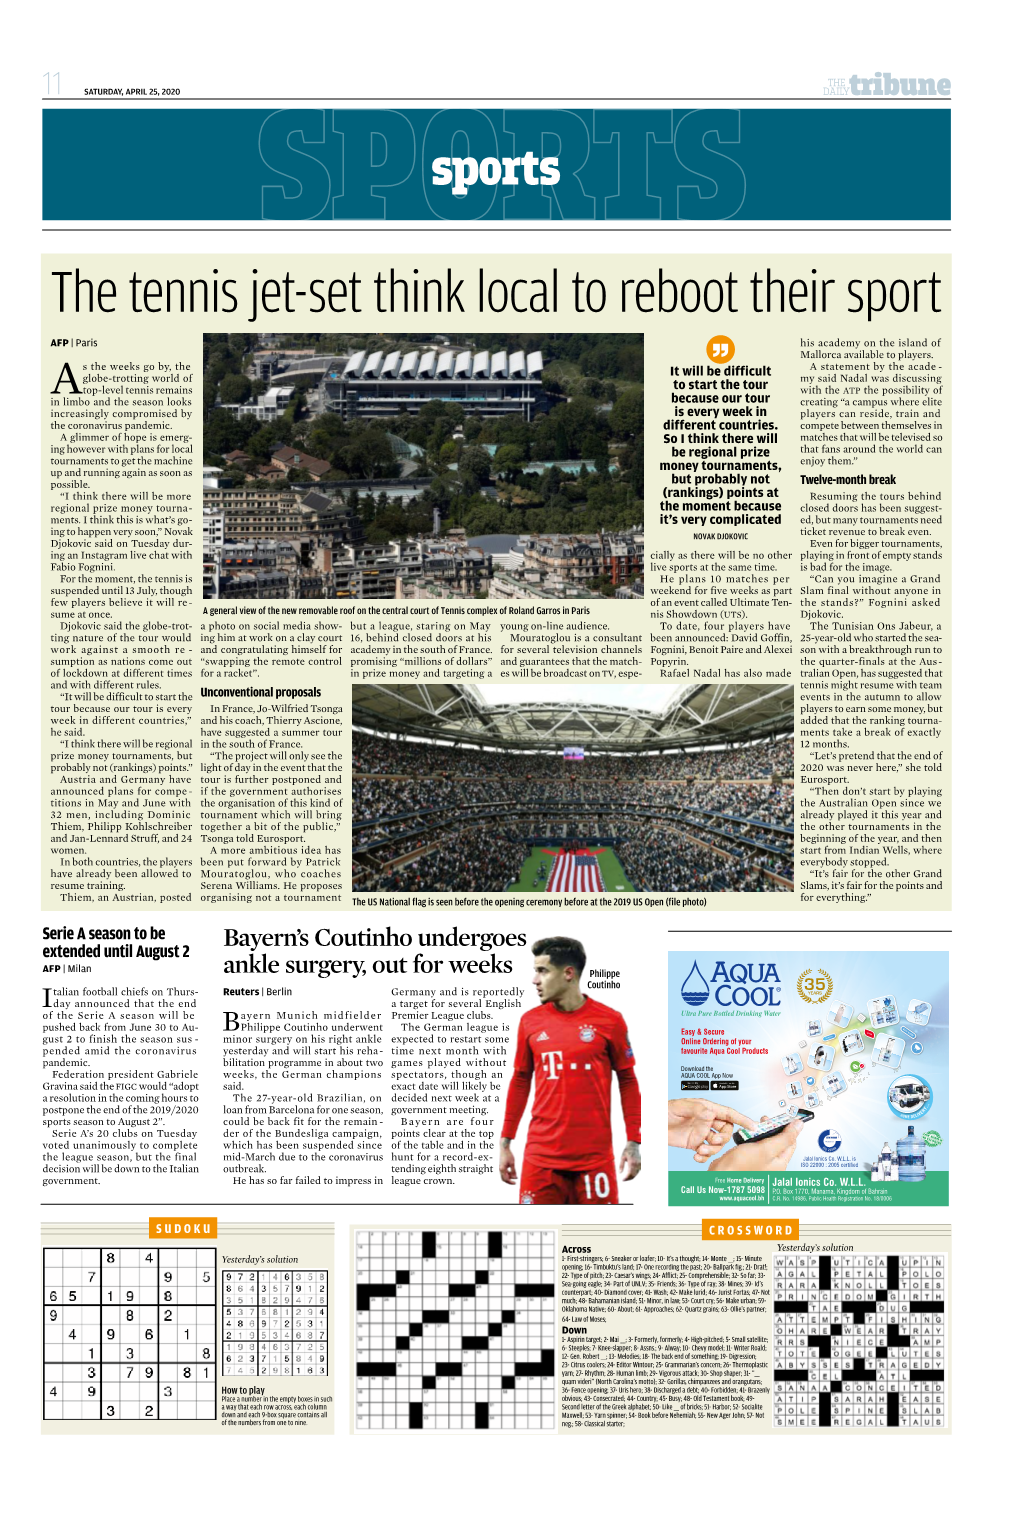 The Tennis Jet-Set Think Local to Reboot Their Sport